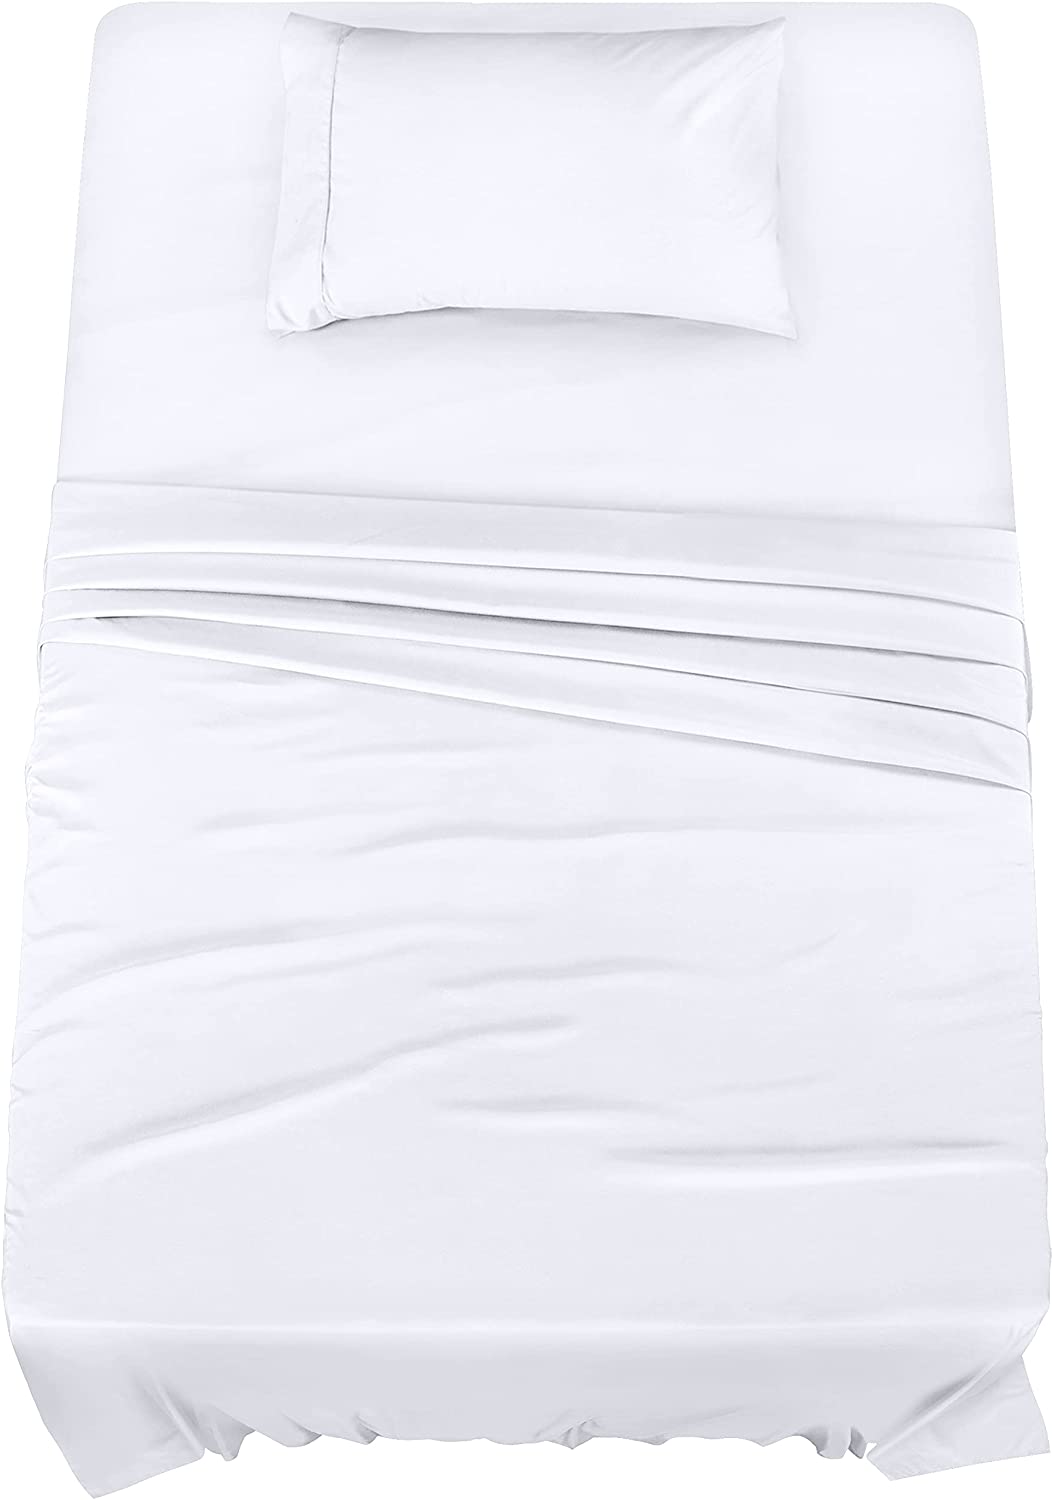 Utopia Bedding Twin Sheet Set, Soft Microfiber 3 Piece Bed Sheets with 15 Deep Pocket - Easy Care Brushed Microfiber (Quatrefoi